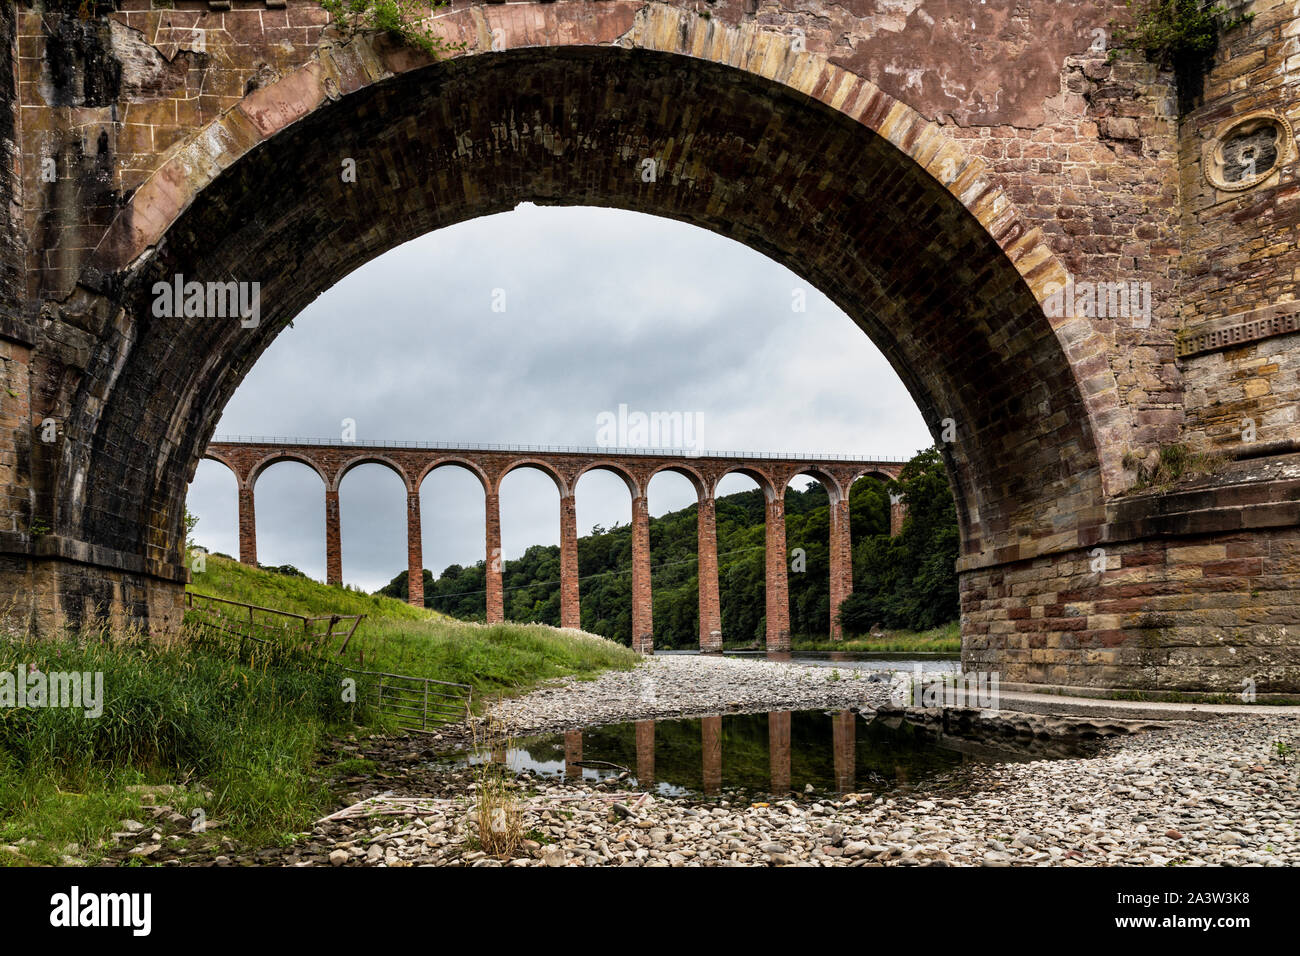 Leaderfoot Viaduct is a disused railway viaduct over the River Tweed, Scottish Borders. It is seen here framed by the nearby old pedestrian bridge. Stock Photo